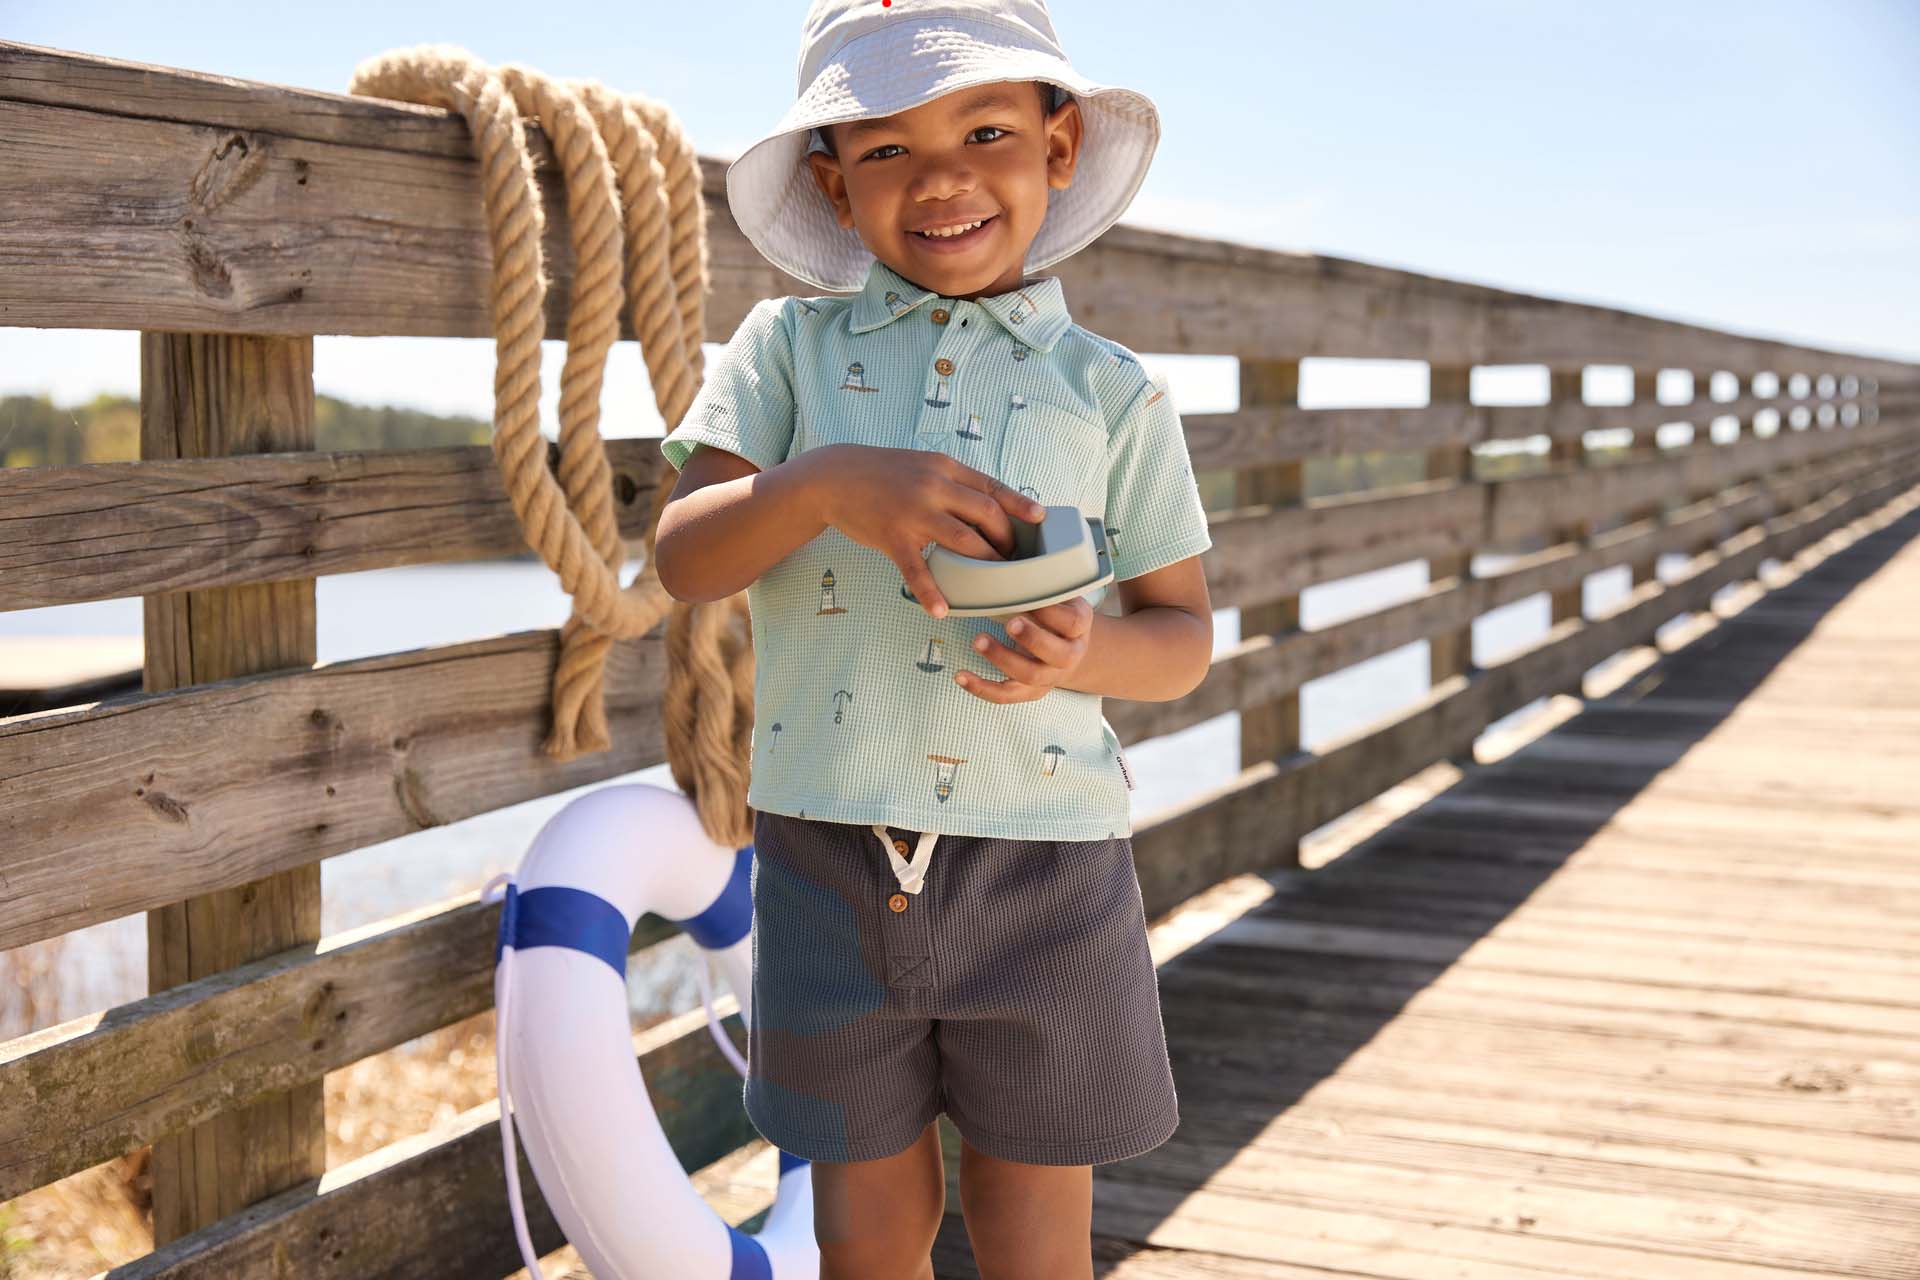 Young boy in a sun hat and summer outfit smiling and holding a toy boat on a wooden pier with a lifebuoy nearby.